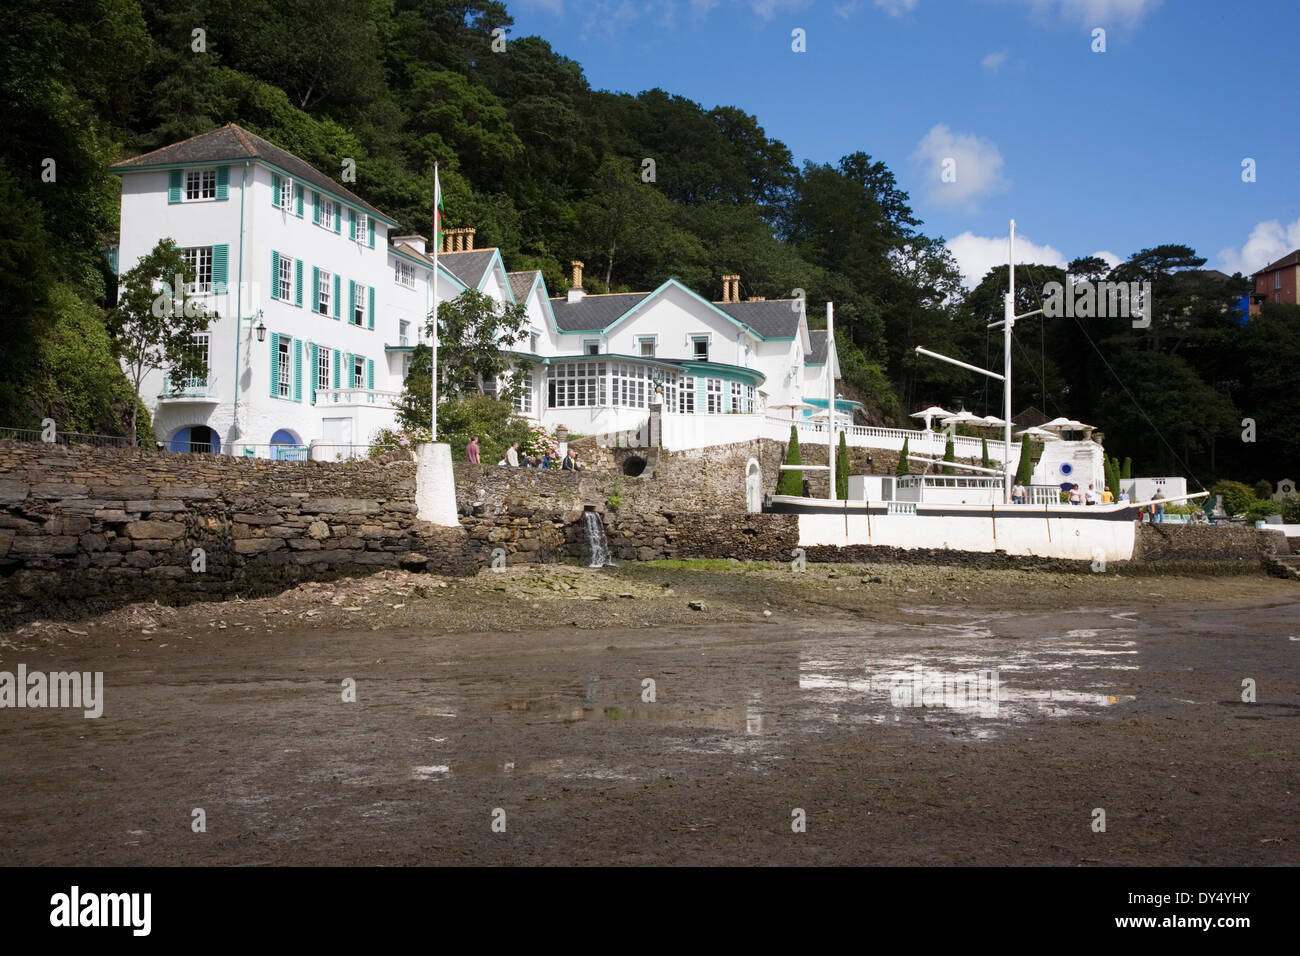 Portmeirion hotel restaurant estuary at low tide with boat. Portmeirion, North Wales, United Kingdom Stock Photo